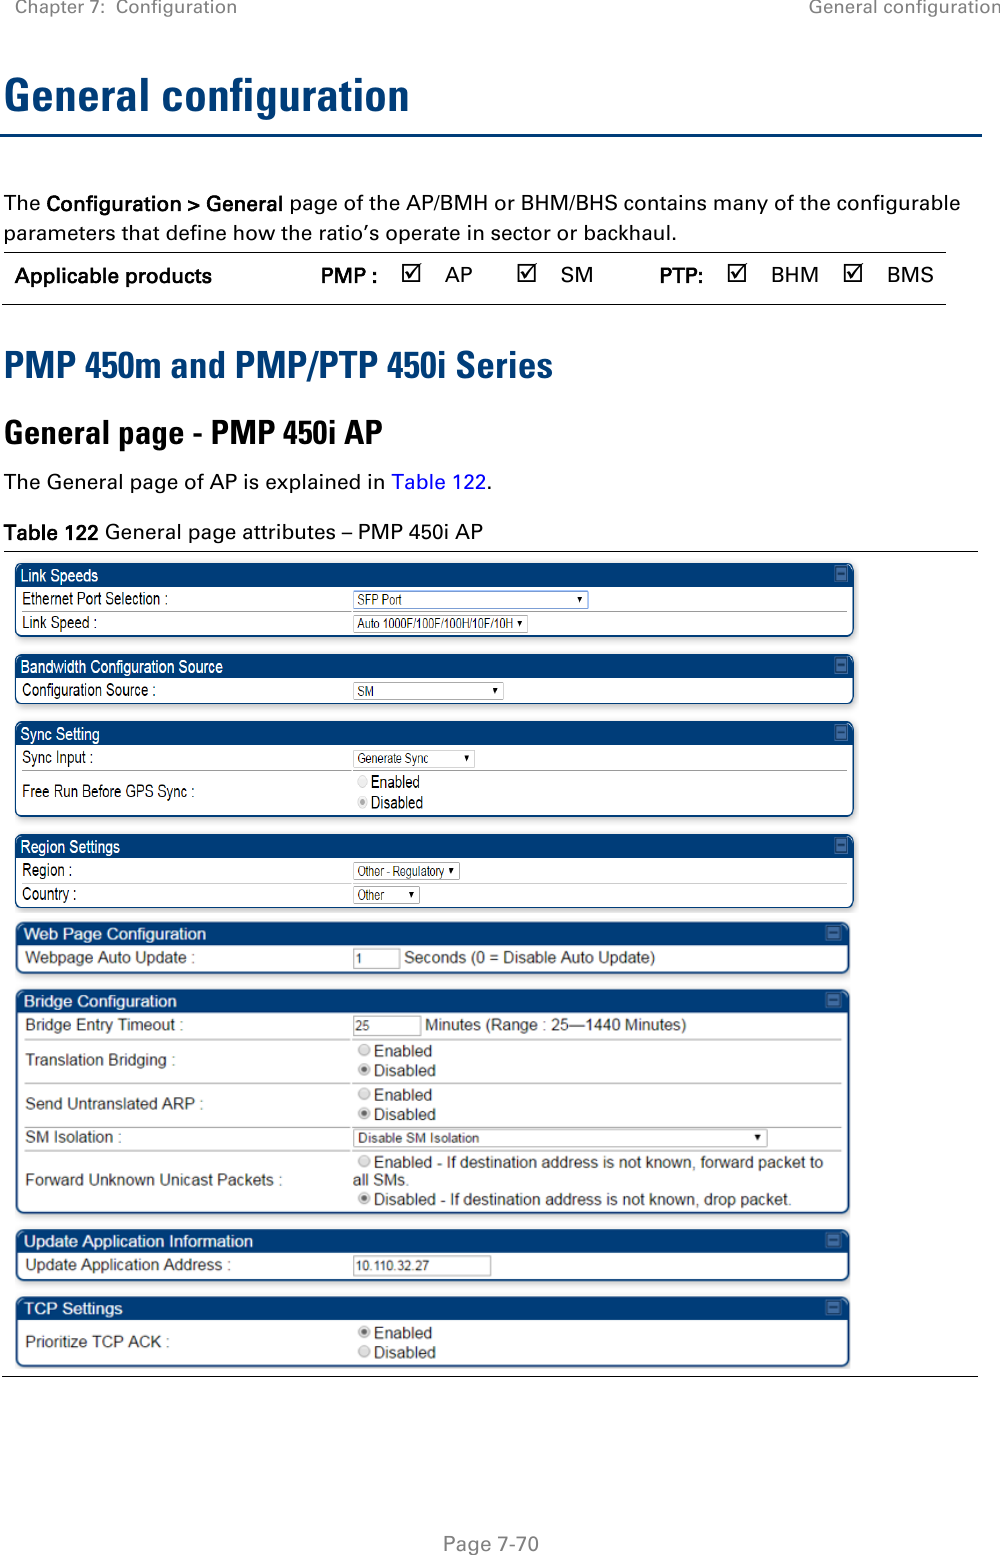 Chapter 7:  Configuration General configuration   Page 7-70 General configuration The Configuration &gt; General page of the AP/BMH or BHM/BHS contains many of the configurable parameters that define how the ratio’s operate in sector or backhaul. Applicable products PMP :  AP  SM PTP:  BHM  BMS PMP 450m and PMP/PTP 450i Series General page - PMP 450i AP  The General page of AP is explained in Table 122.  Table 122 General page attributes – PMP 450i AP    